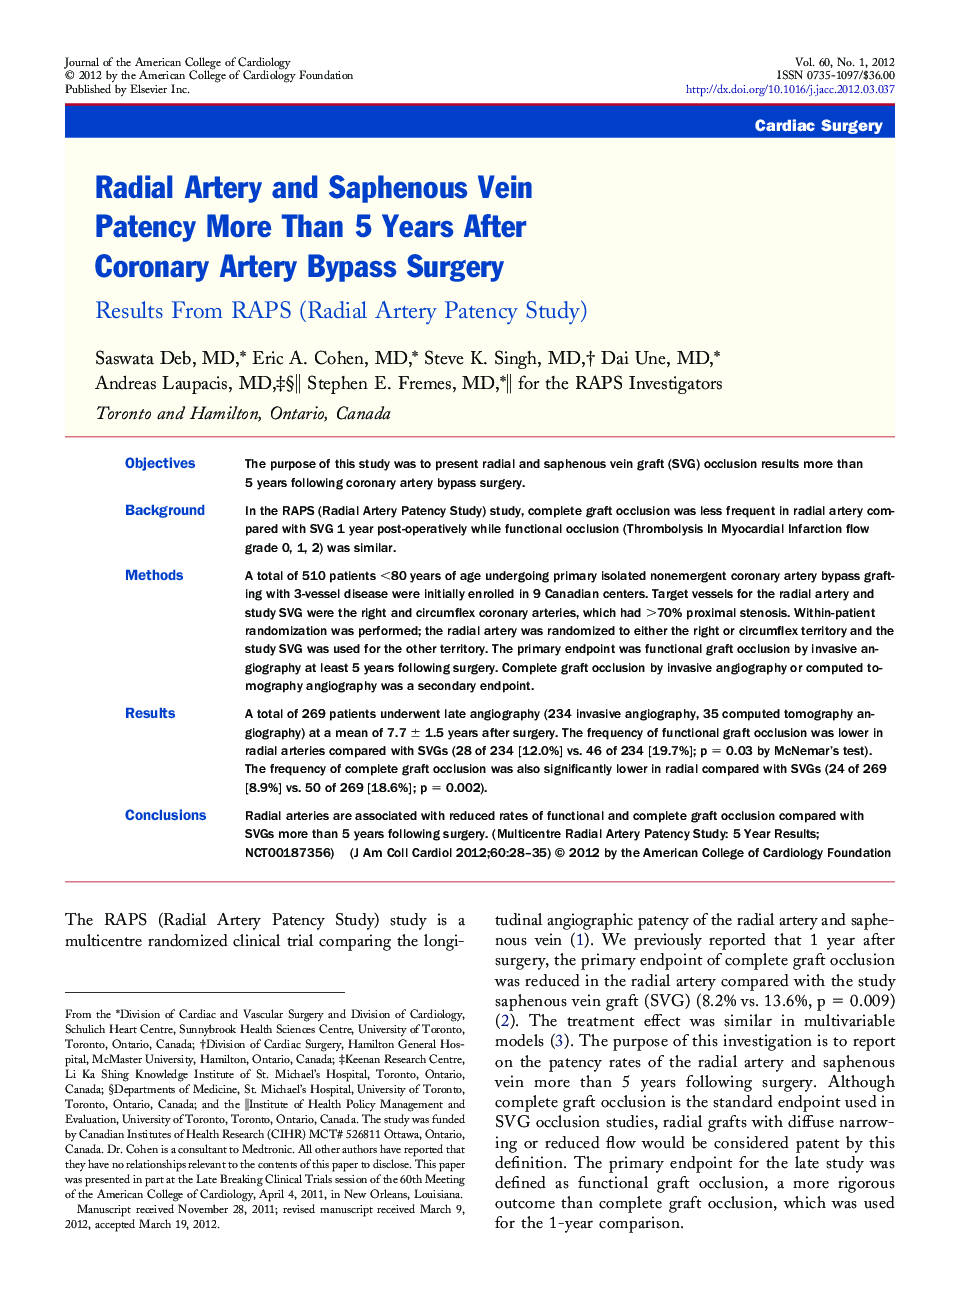 Radial Artery and Saphenous Vein Patency More Than 5 Years After Coronary Artery Bypass Surgery : Results From RAPS (Radial Artery Patency Study)